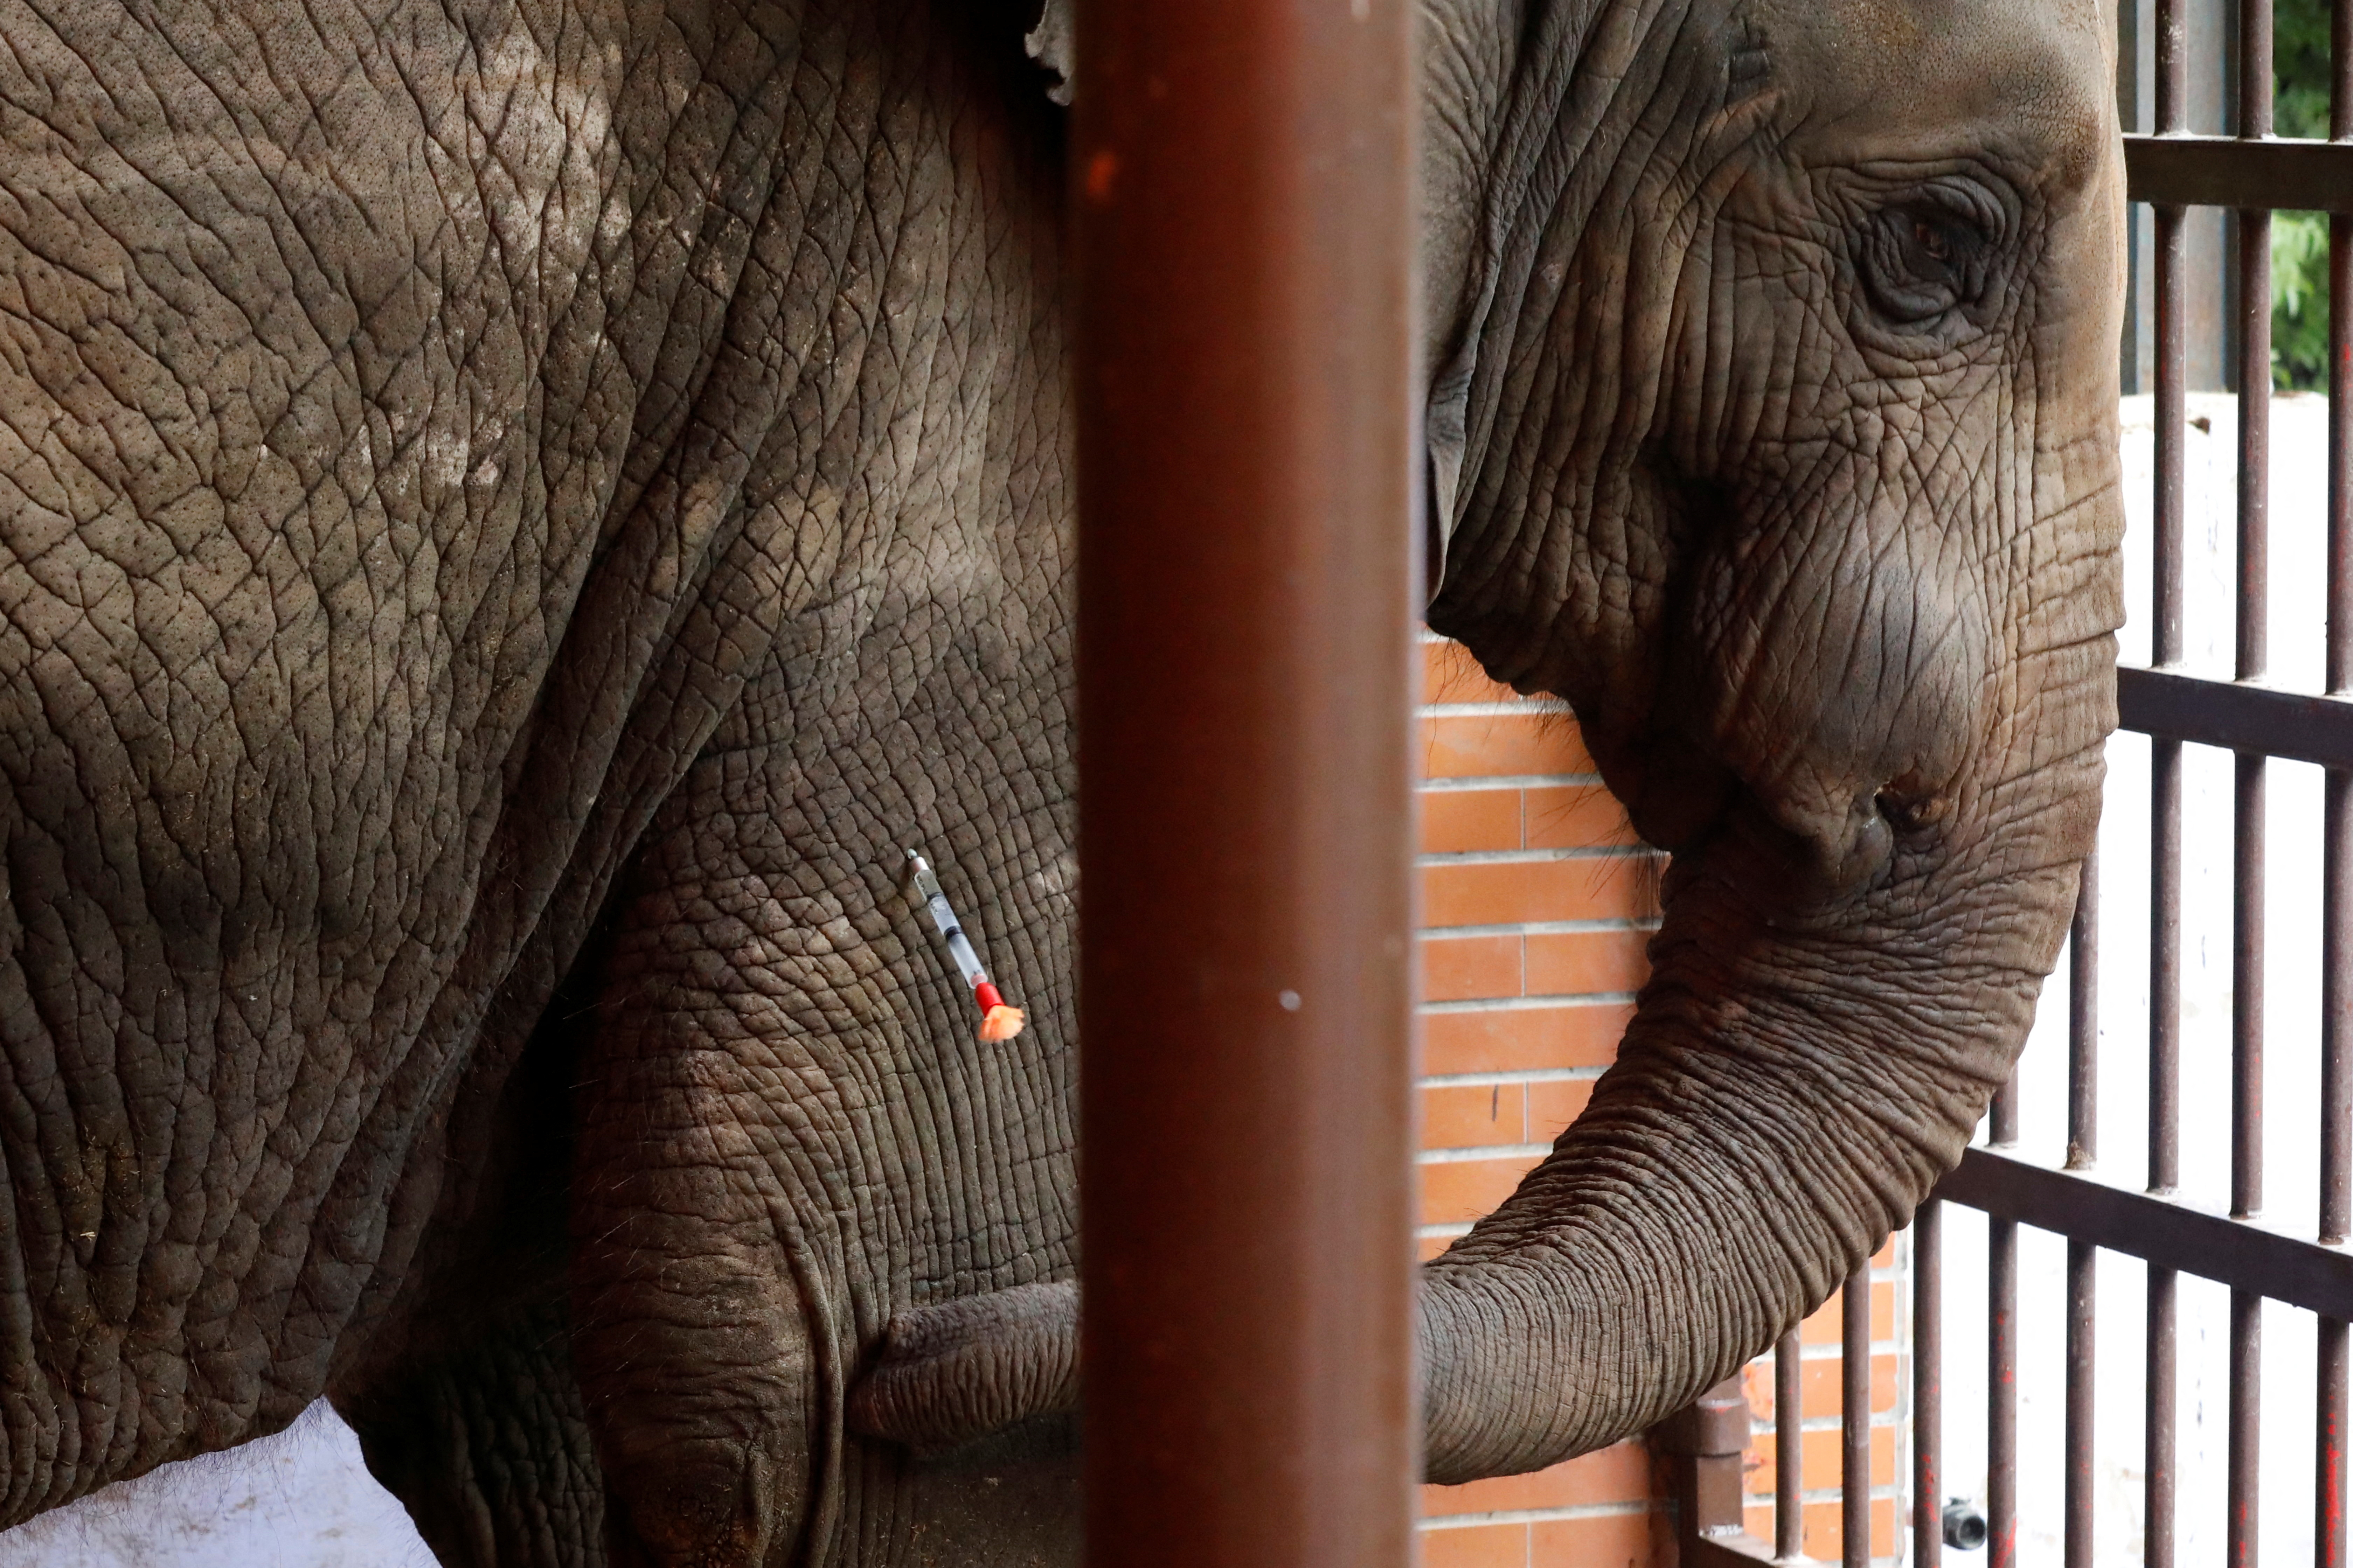 Vets and animal experts from the FOUR PAWS International, perform dental procedure of an elephant at the zoo in Karachi,